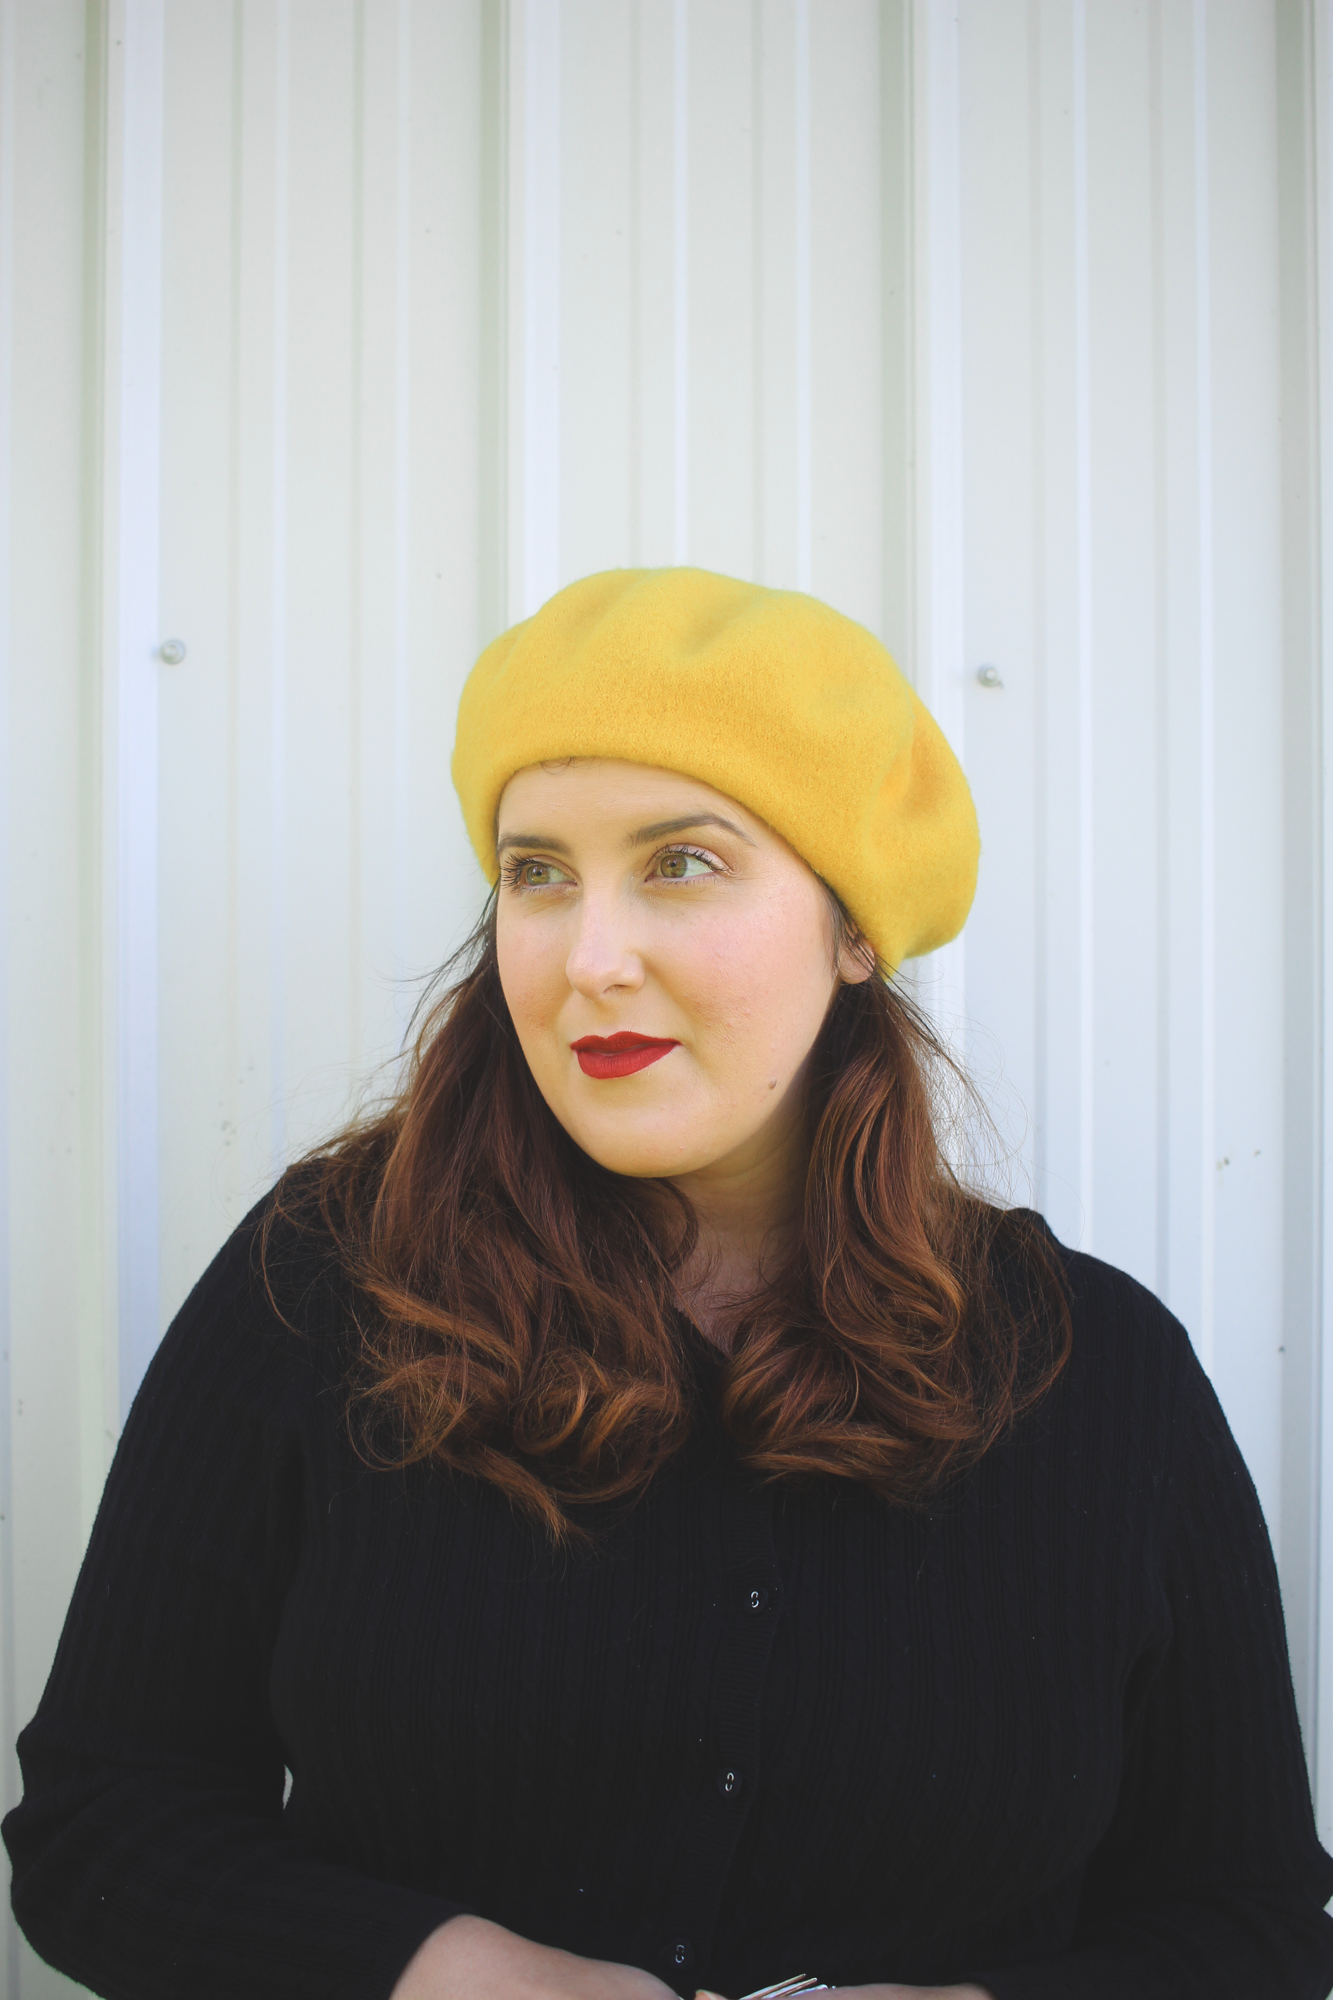 woman with curled hair wearing a yellow beret